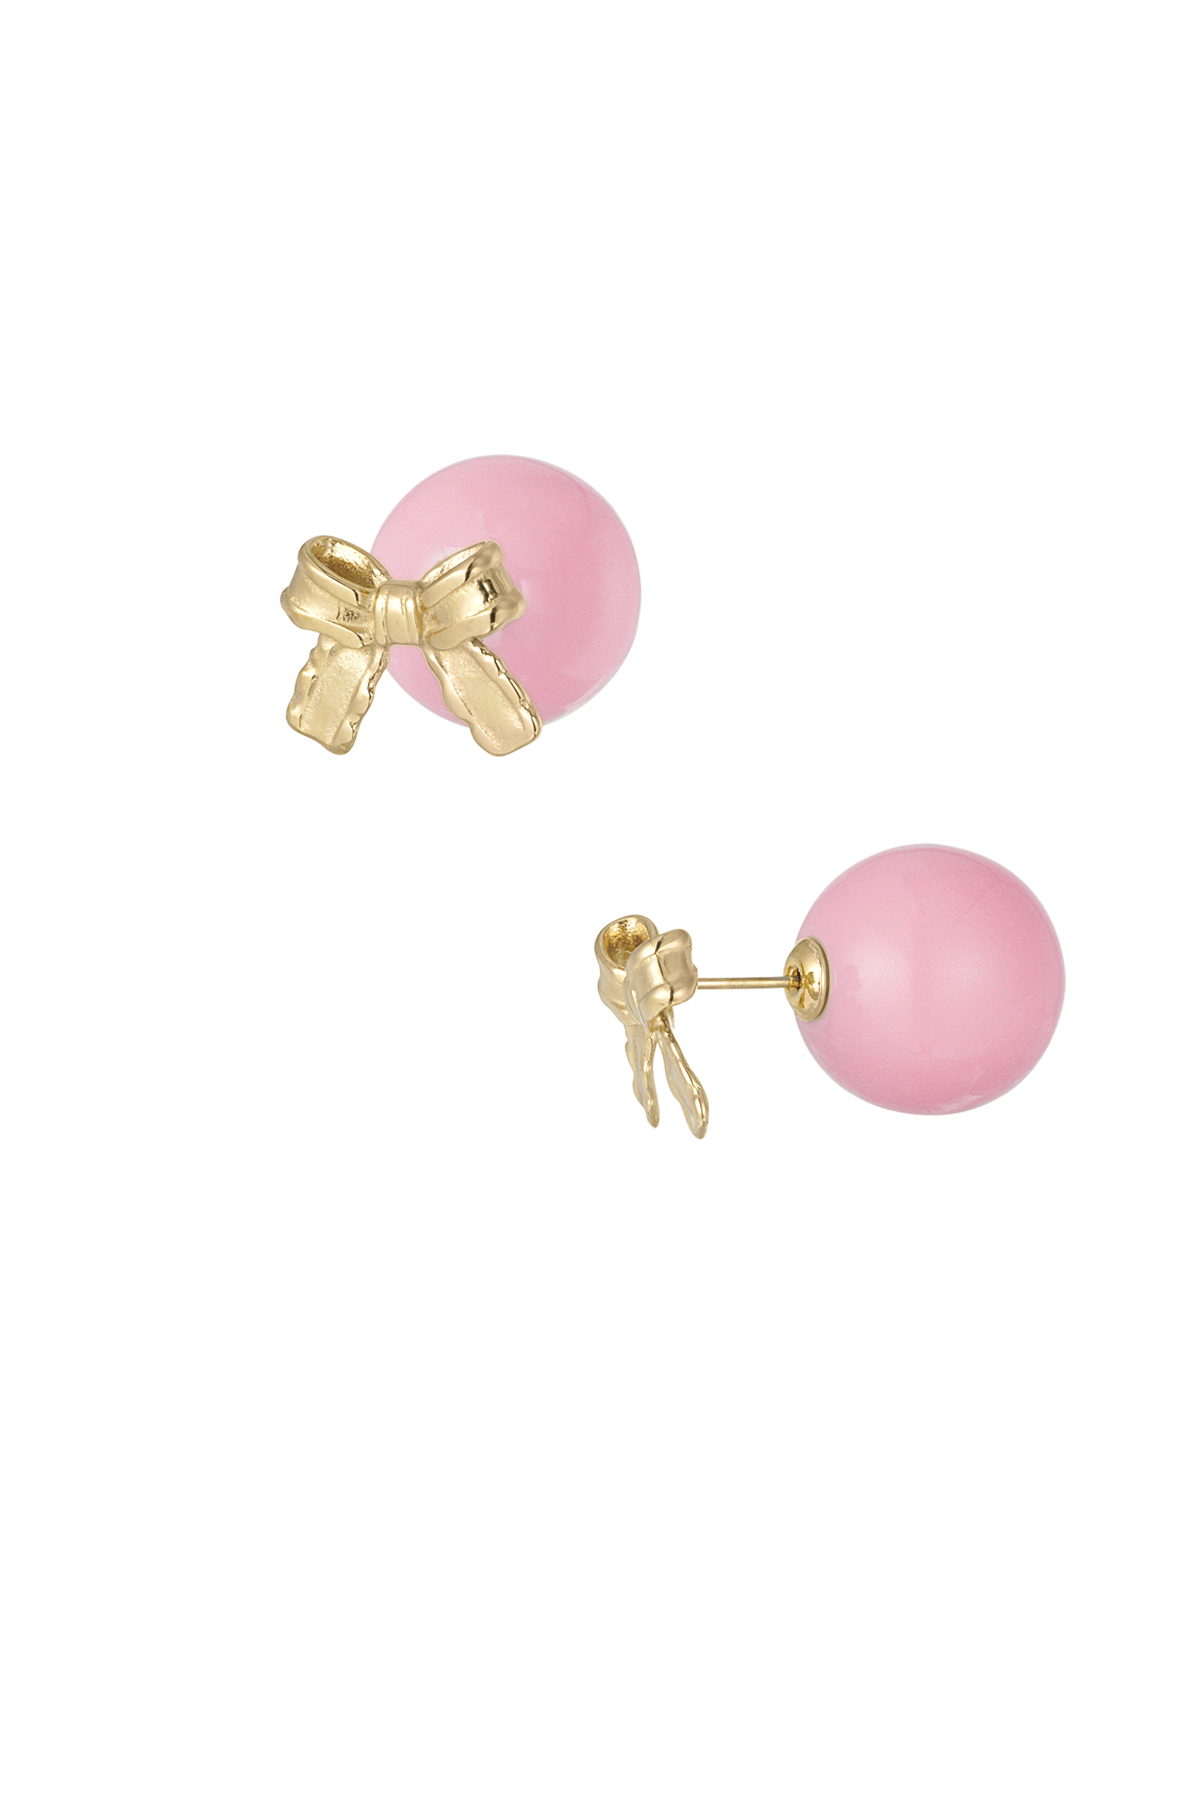 Boucles d'oreilles baby boo bow - rose